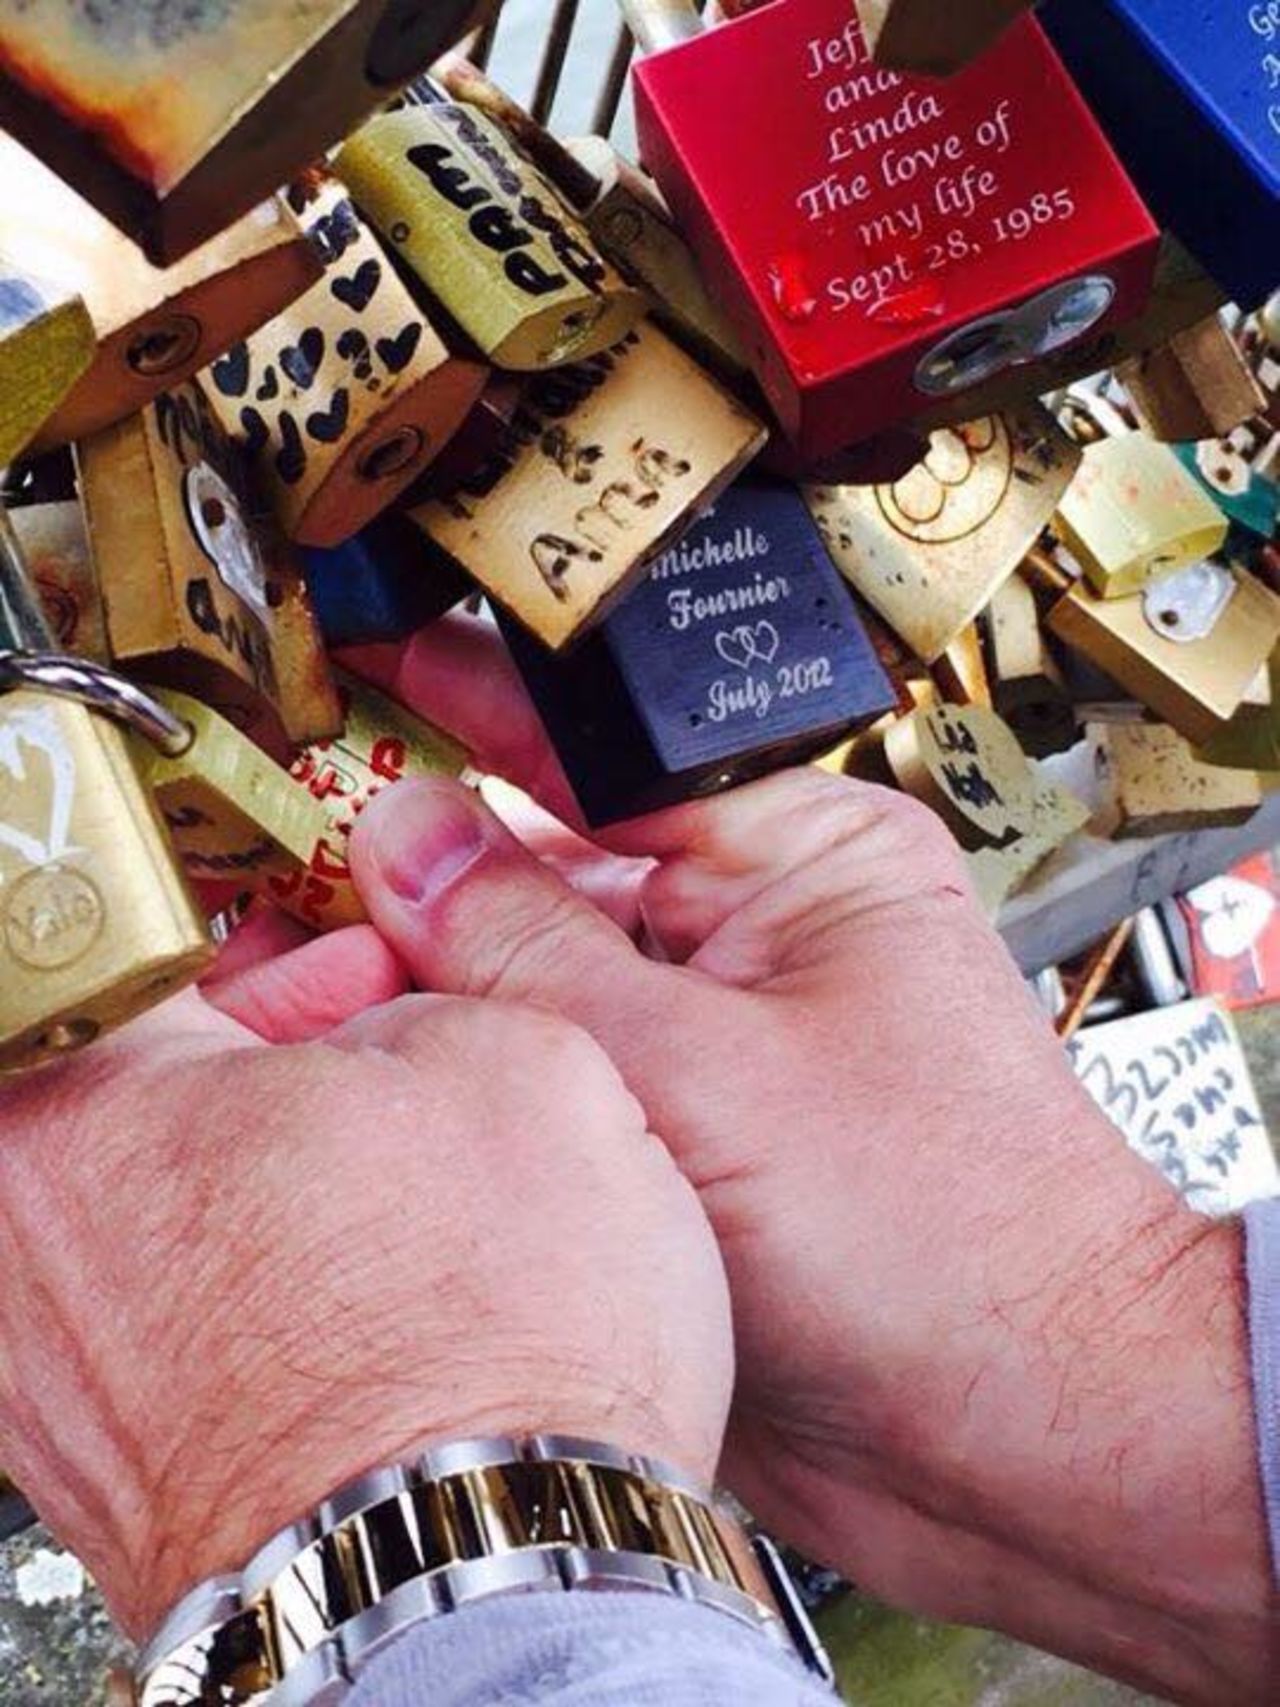 "I personally think the lock bridge is beautiful with all the love locks," said <a href="https://www.facebook.com/photo.php?fbid=819661421444296&set=p.819661421444296&type=1&theater" target="_blank" target="_blank">Jessica Gonzaga</a>, who sealed her love in May.